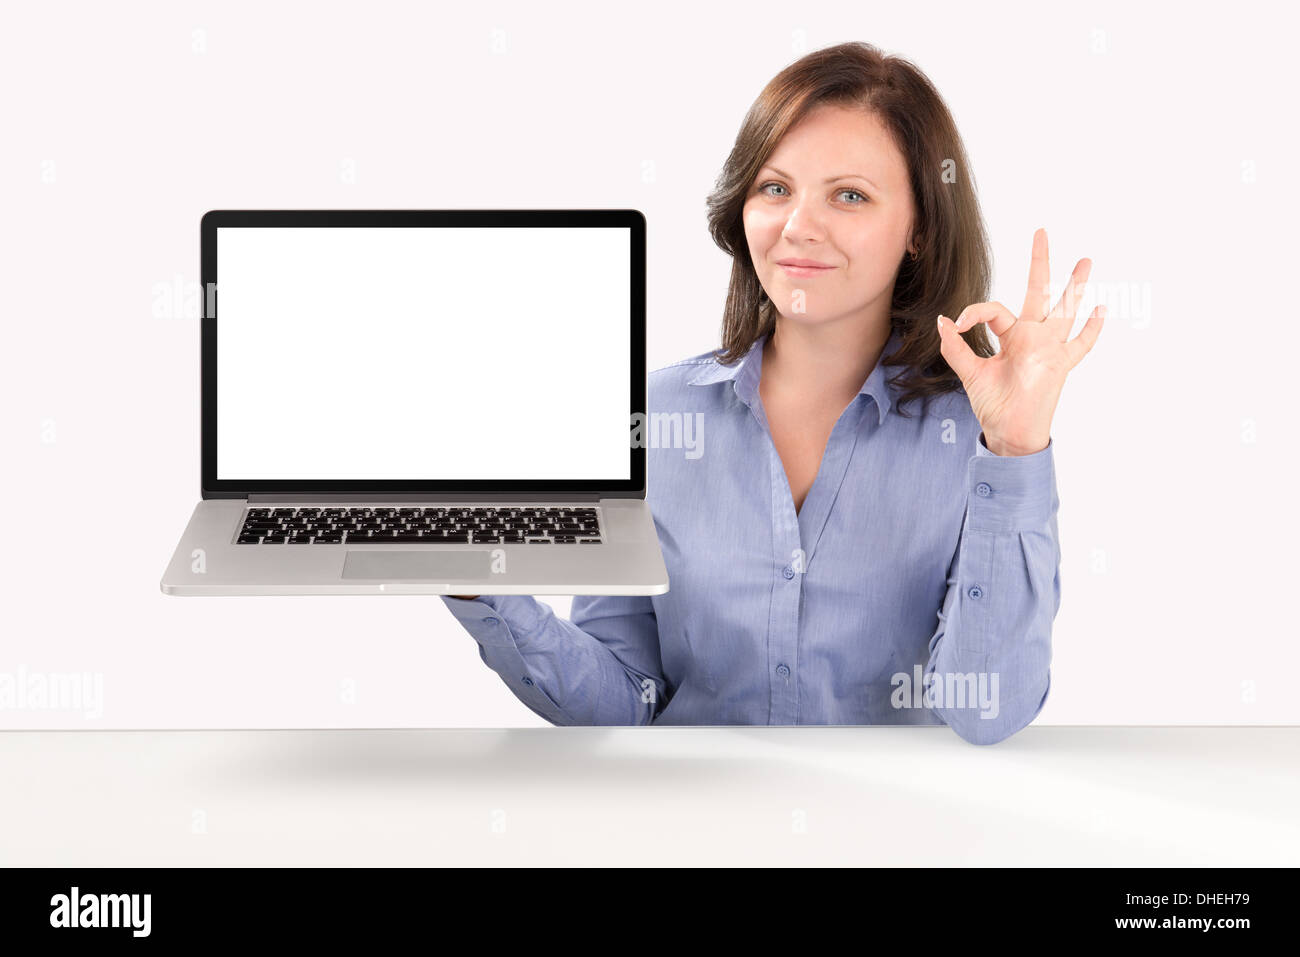 Business woman is holding a laptop in one hand and by other hand showing ok gesture, business concept Stock Photo